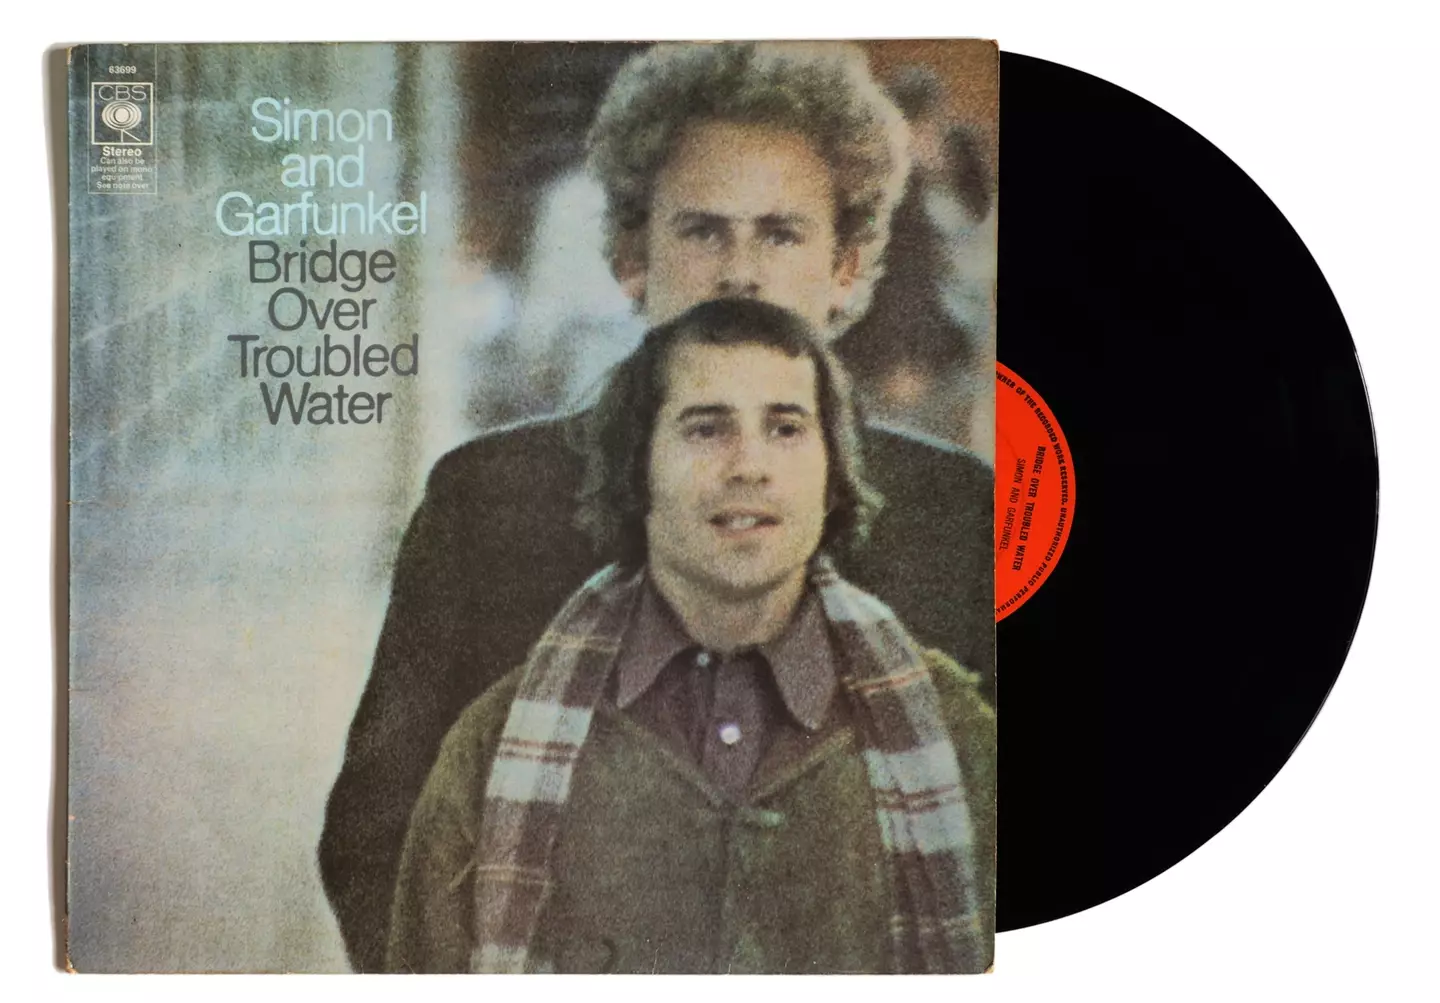 Even Simon and Garfunkel ended up having one of their songs on the banned list.